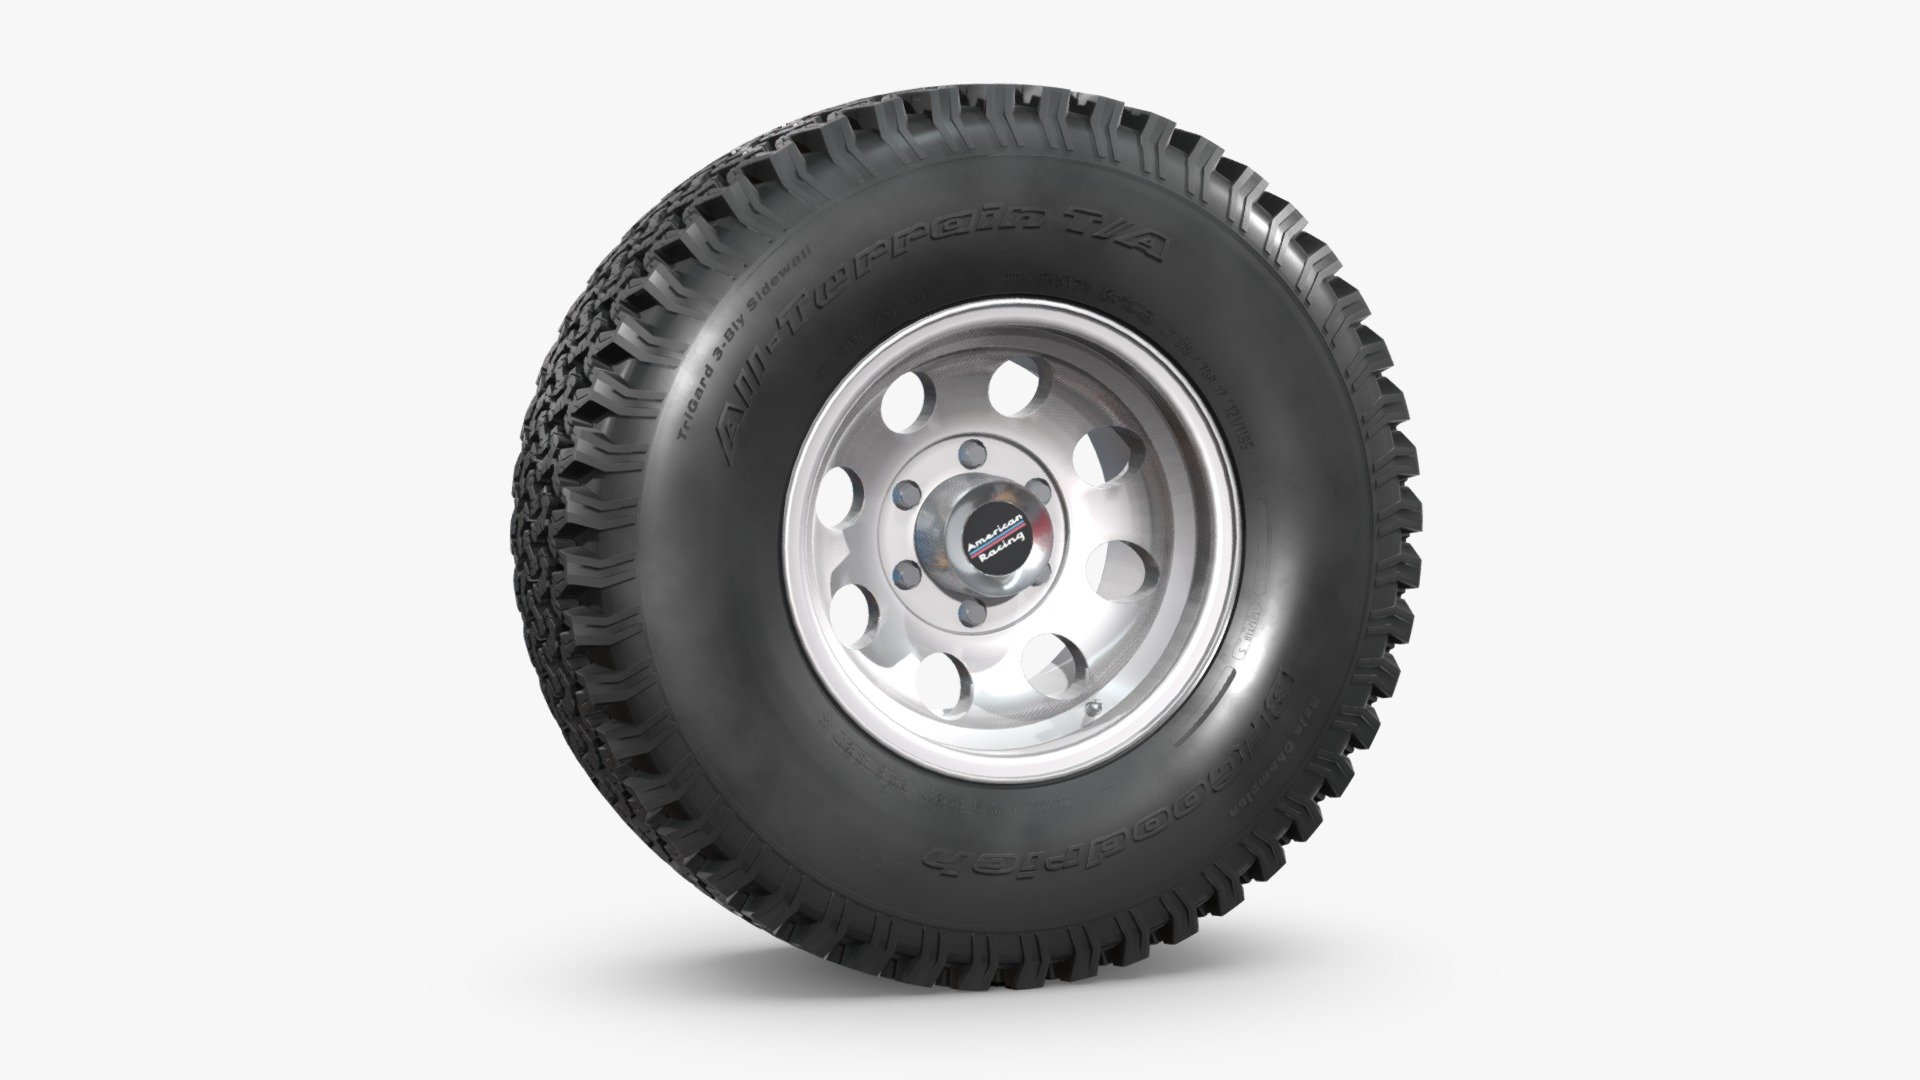 NN 3D store.

3D model of an off road wheel and tire combo.

The model is fully textured and was created with 3DS Max 2016 using the open subdivision modifier which has been left in the stack to adjust the level of detail.

There are also included a Blender format with textures.

Exchange files included: 3DS, FBX and OBJ.

SPECIFICATIONS:

The model has 83.200 polygons.

Scale/transform is set to 100%, units are set to centimeters, texture paths are stripped and and it is made to real world scale.

PRESENTATION:

Product is ready to render out of the box only in 3DSMax.

Lights and cameras are not included.

MATERIALS AND TEXTURES:

All textures are included and mapped in all files but they will render like the preview images only in 3DSMax with V-Ray, the rest of the files might have to be adjusted depending on the software you are using.

JPG textures have 2048 x 2048 resolution 3d model